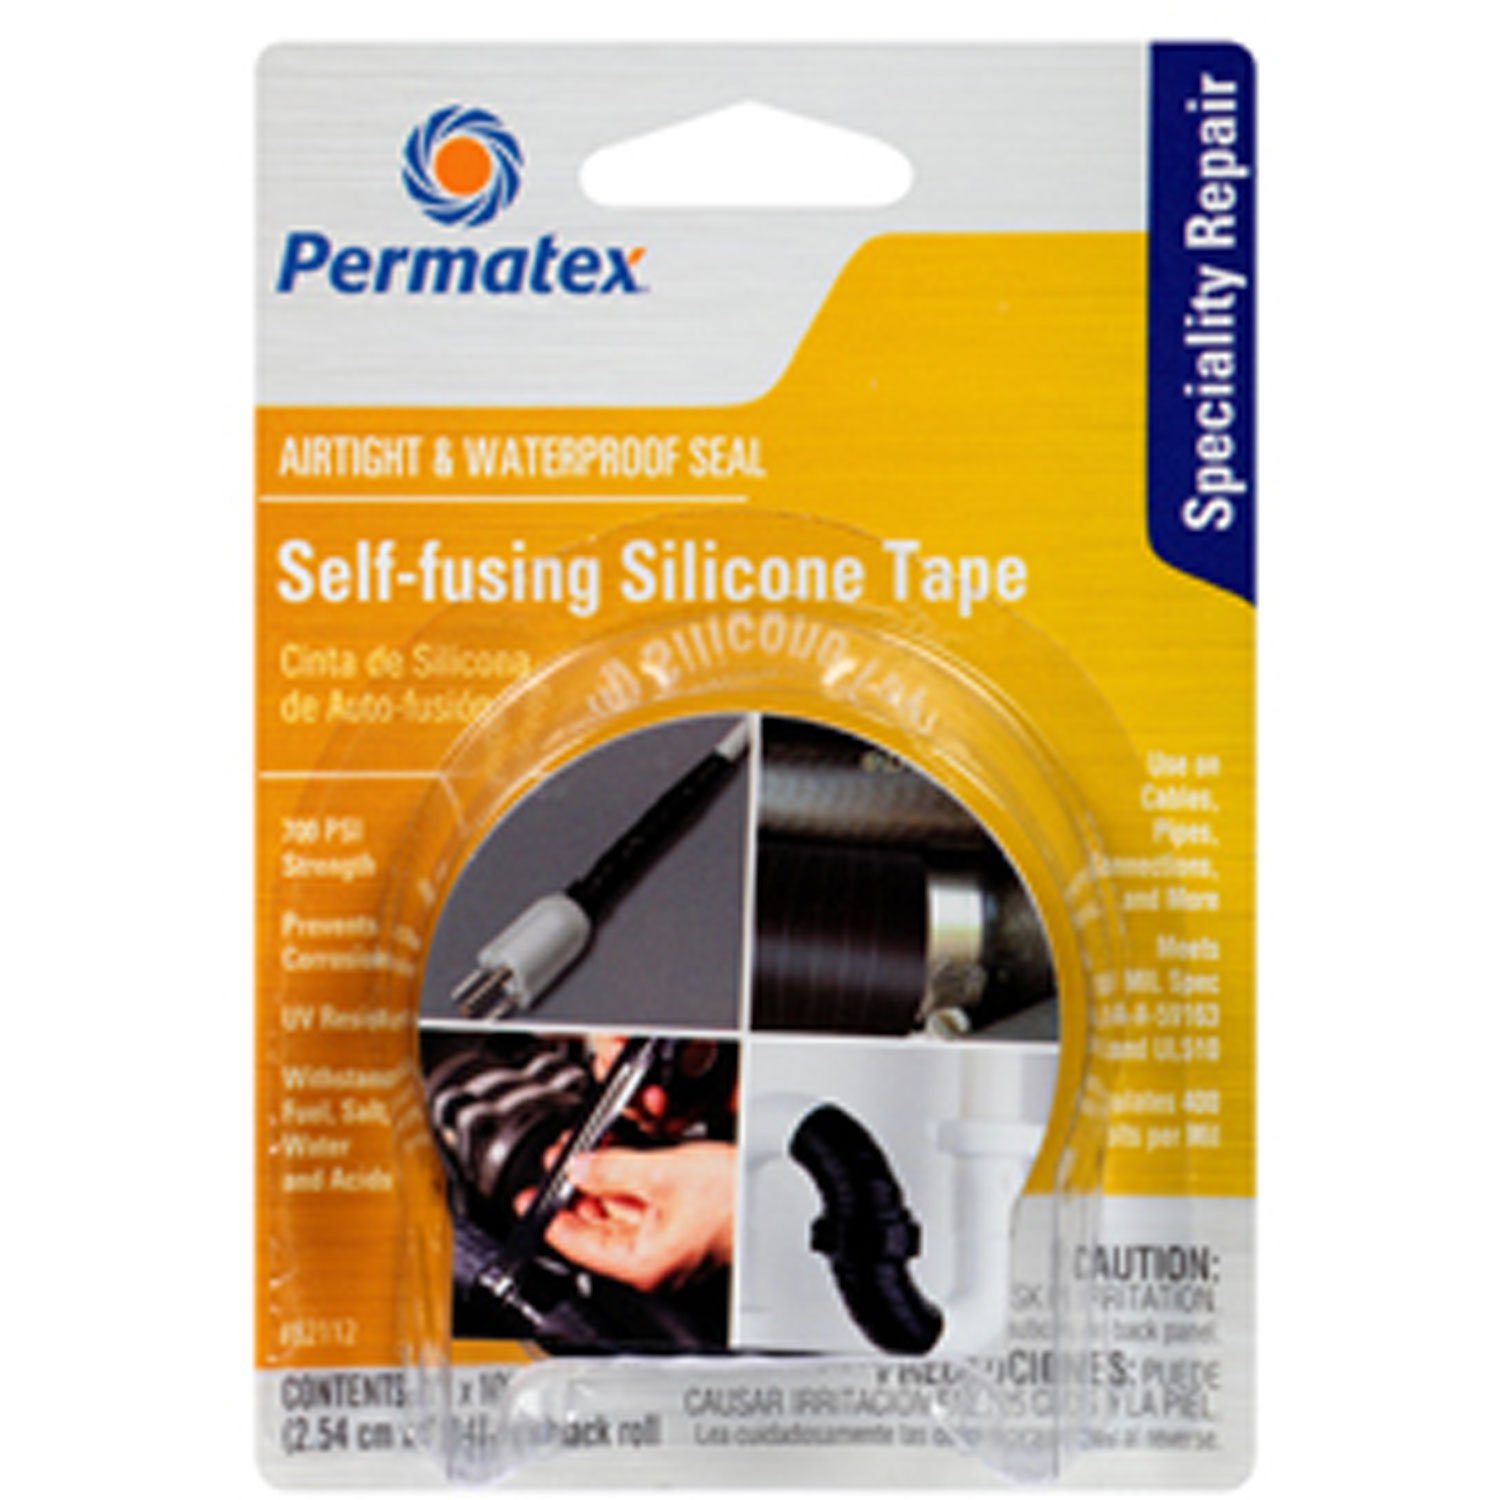 Self-fusing Silicone Tape 1" width